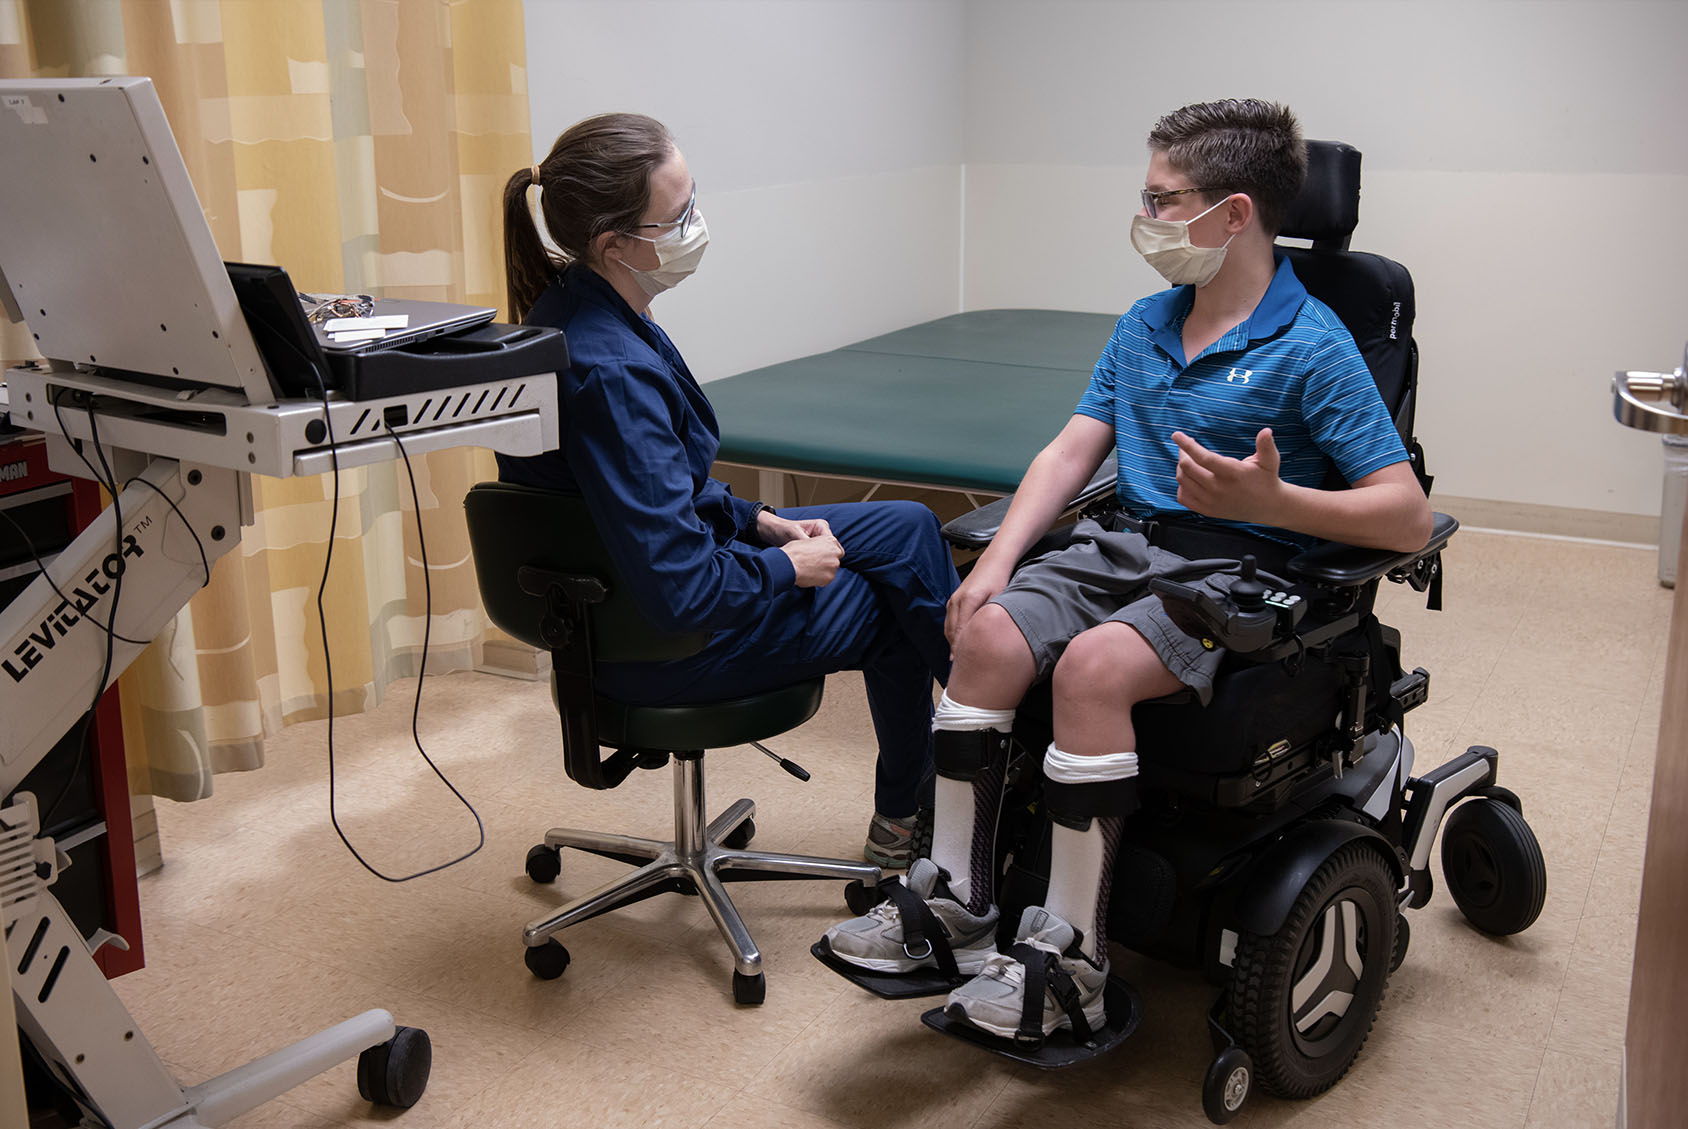 Clinician talking to patient in a wheelchair.